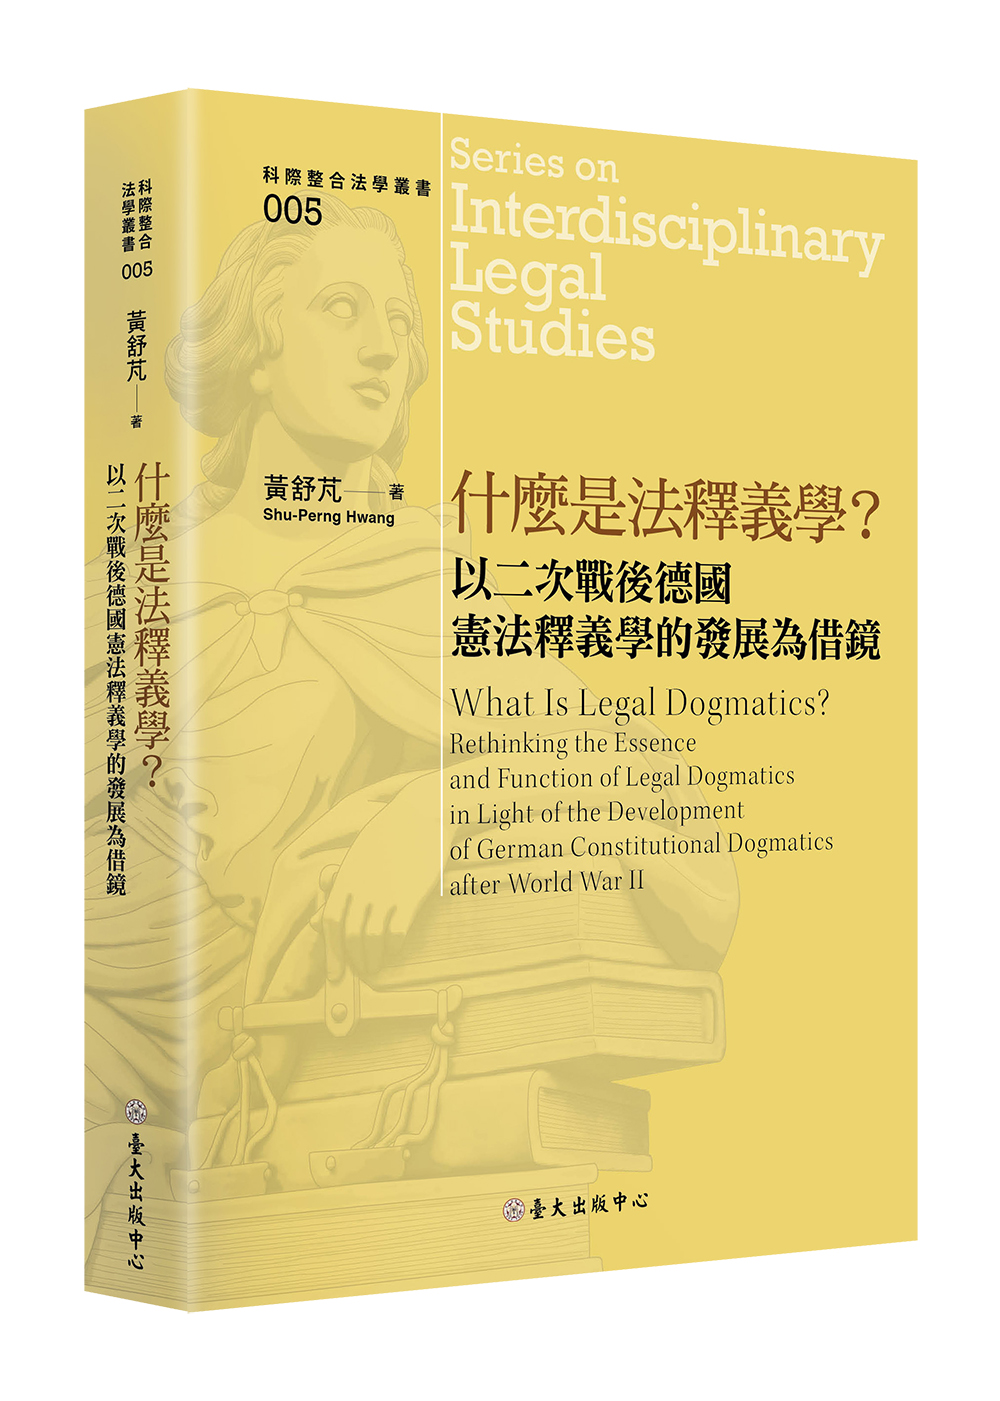 What Is Legal Dogmatics?:  Rethinking the Essence and Function of Legal Dogmatics in Light of the Development of German Constitutional Dogmatics after World War II